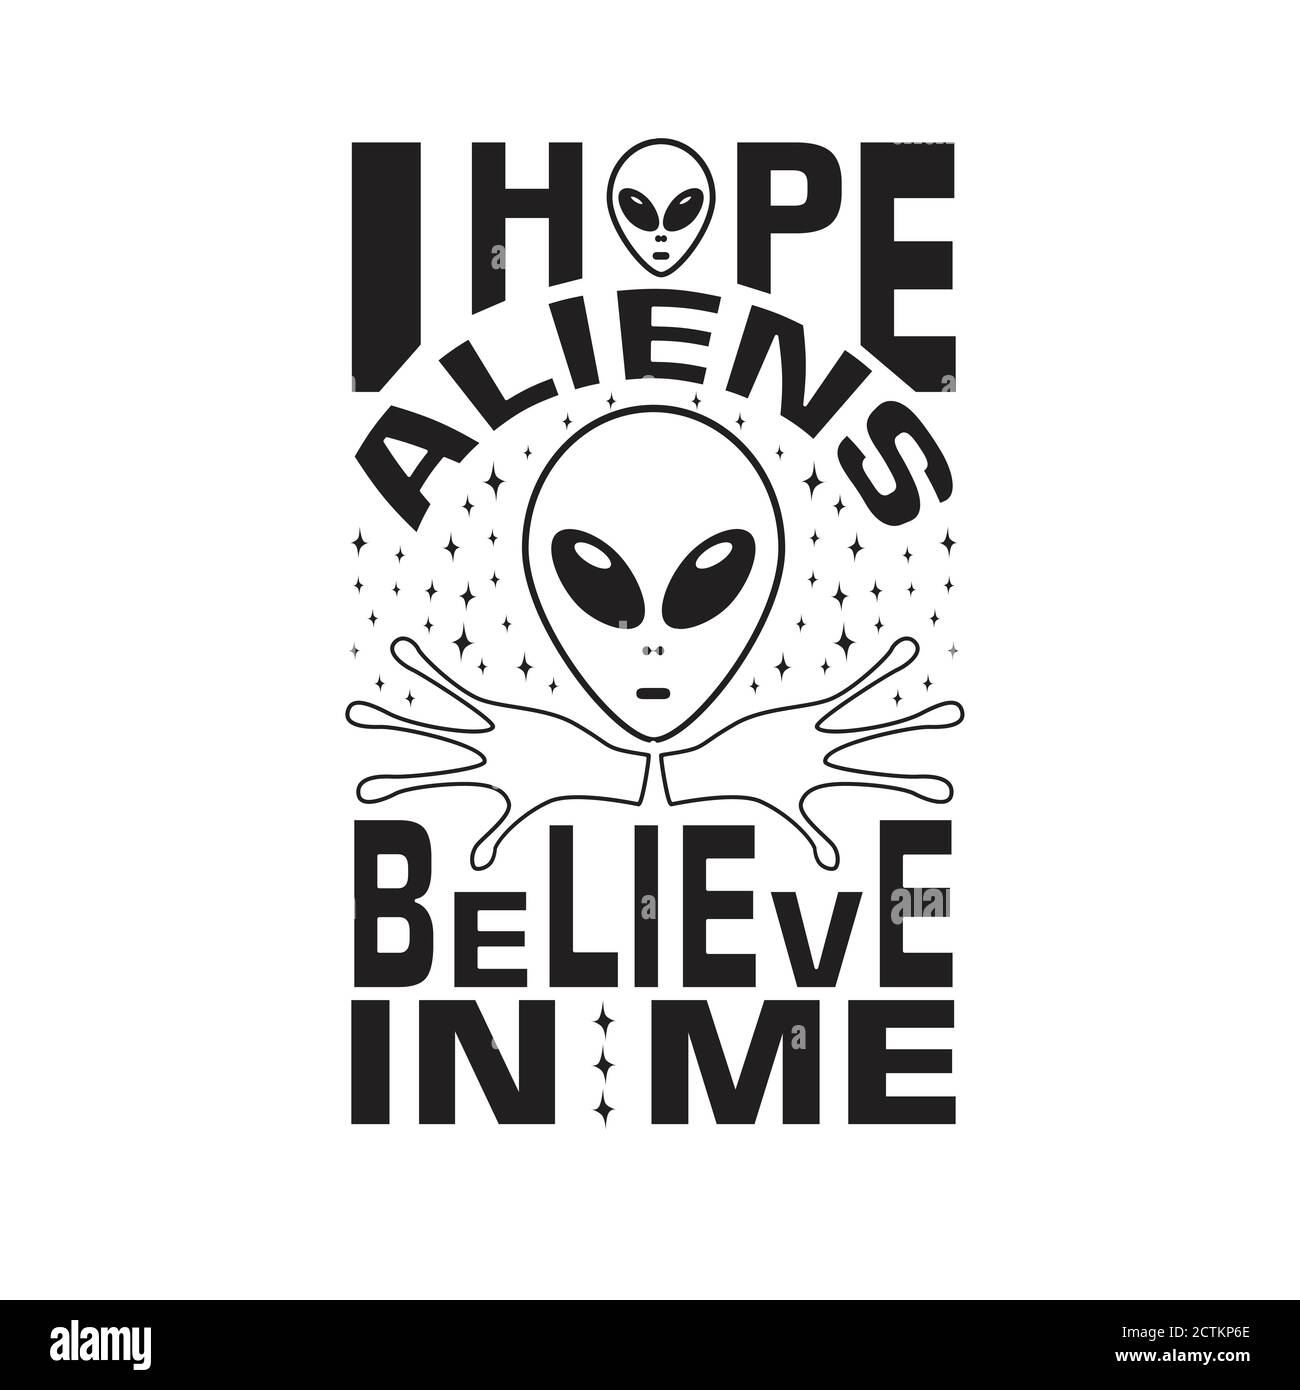 Aliens Quotes and Slogan good for T-Shirt. I Hope Aliens Believe in Me. Stock Vector